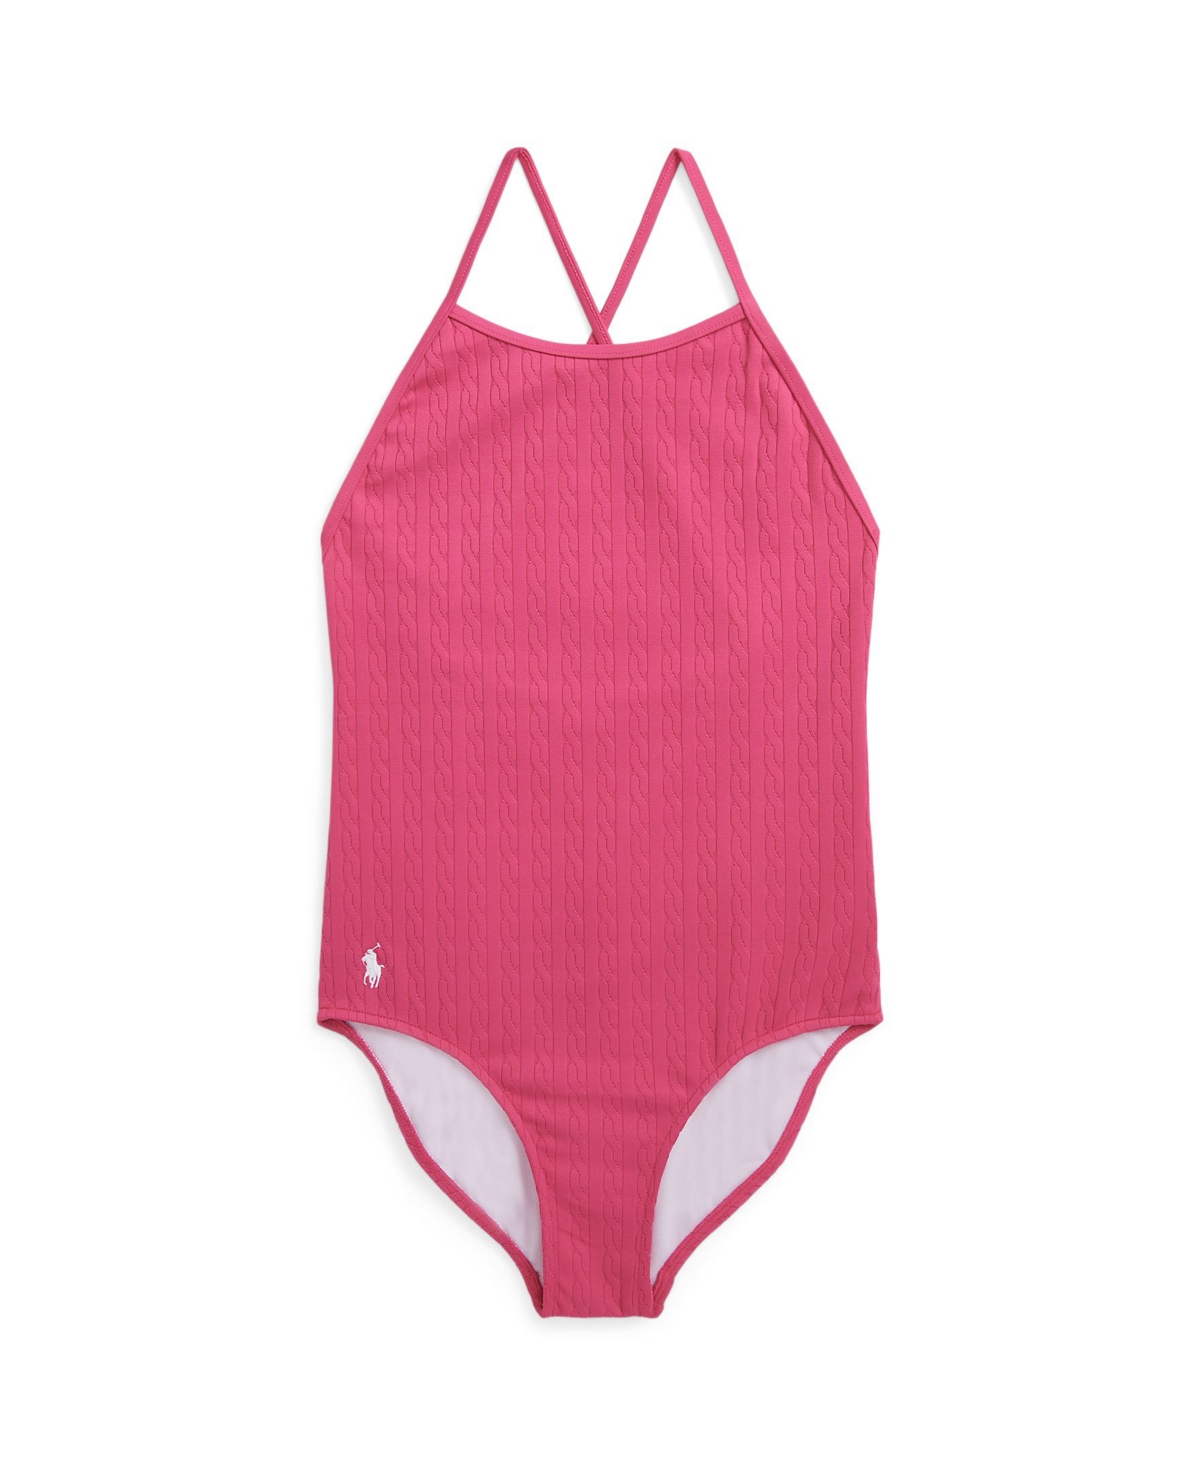 Polo Ralph Lauren Kids' Big Girls Stretch Jacquard One-piece Swimsuit In Bright Pink With White